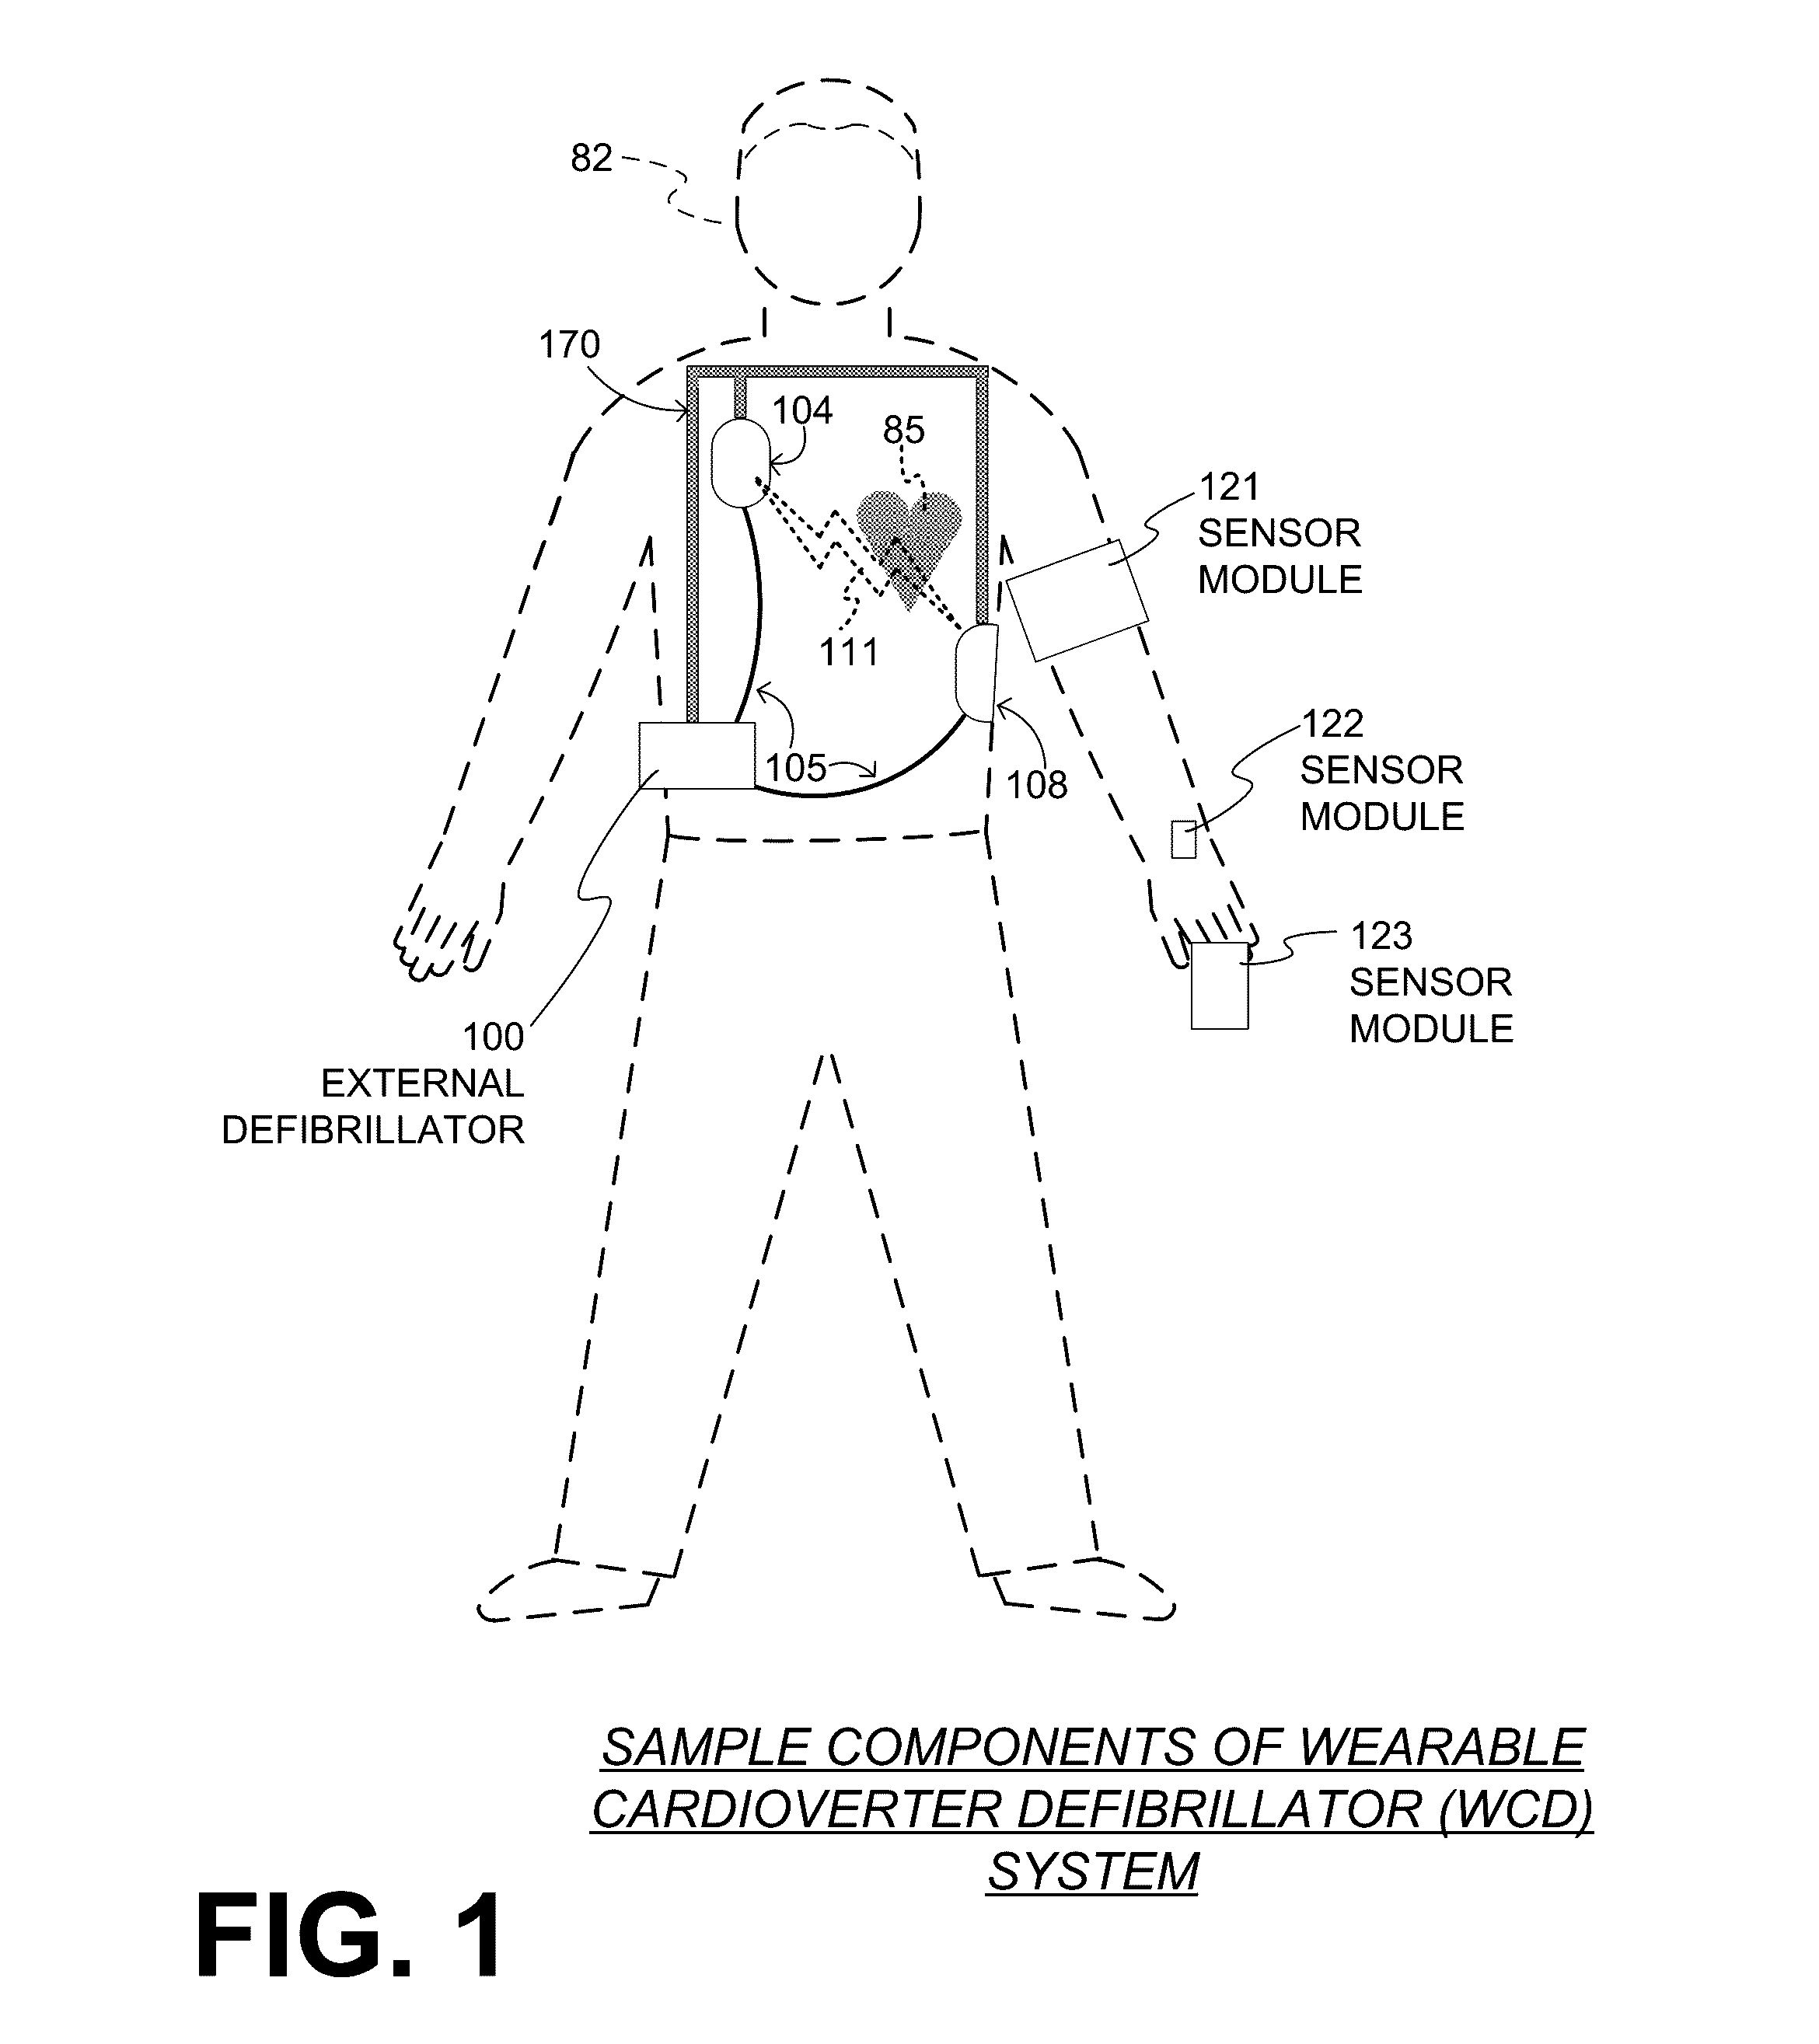 Wearable cardioverter defibrillator (WCD) system using sensor modules for confirmation before shock